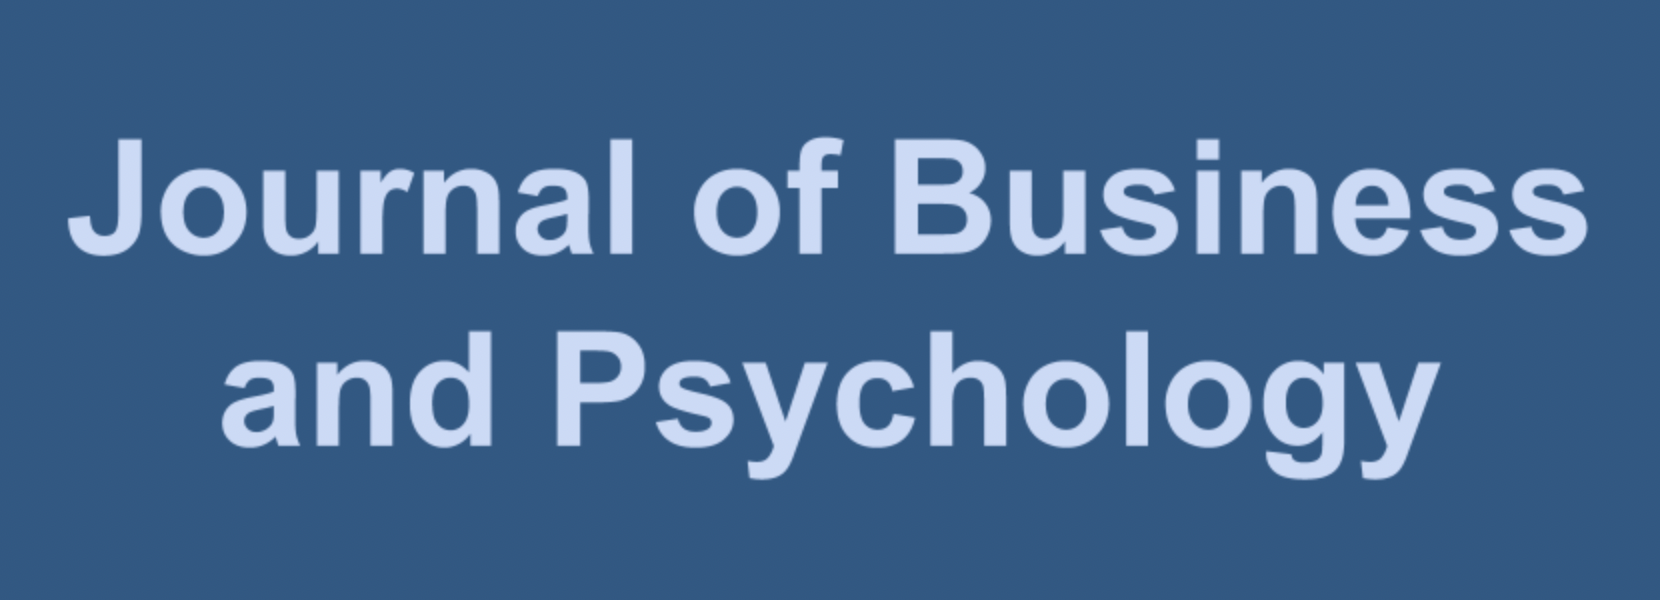 Journal of Business and Psychology Logo